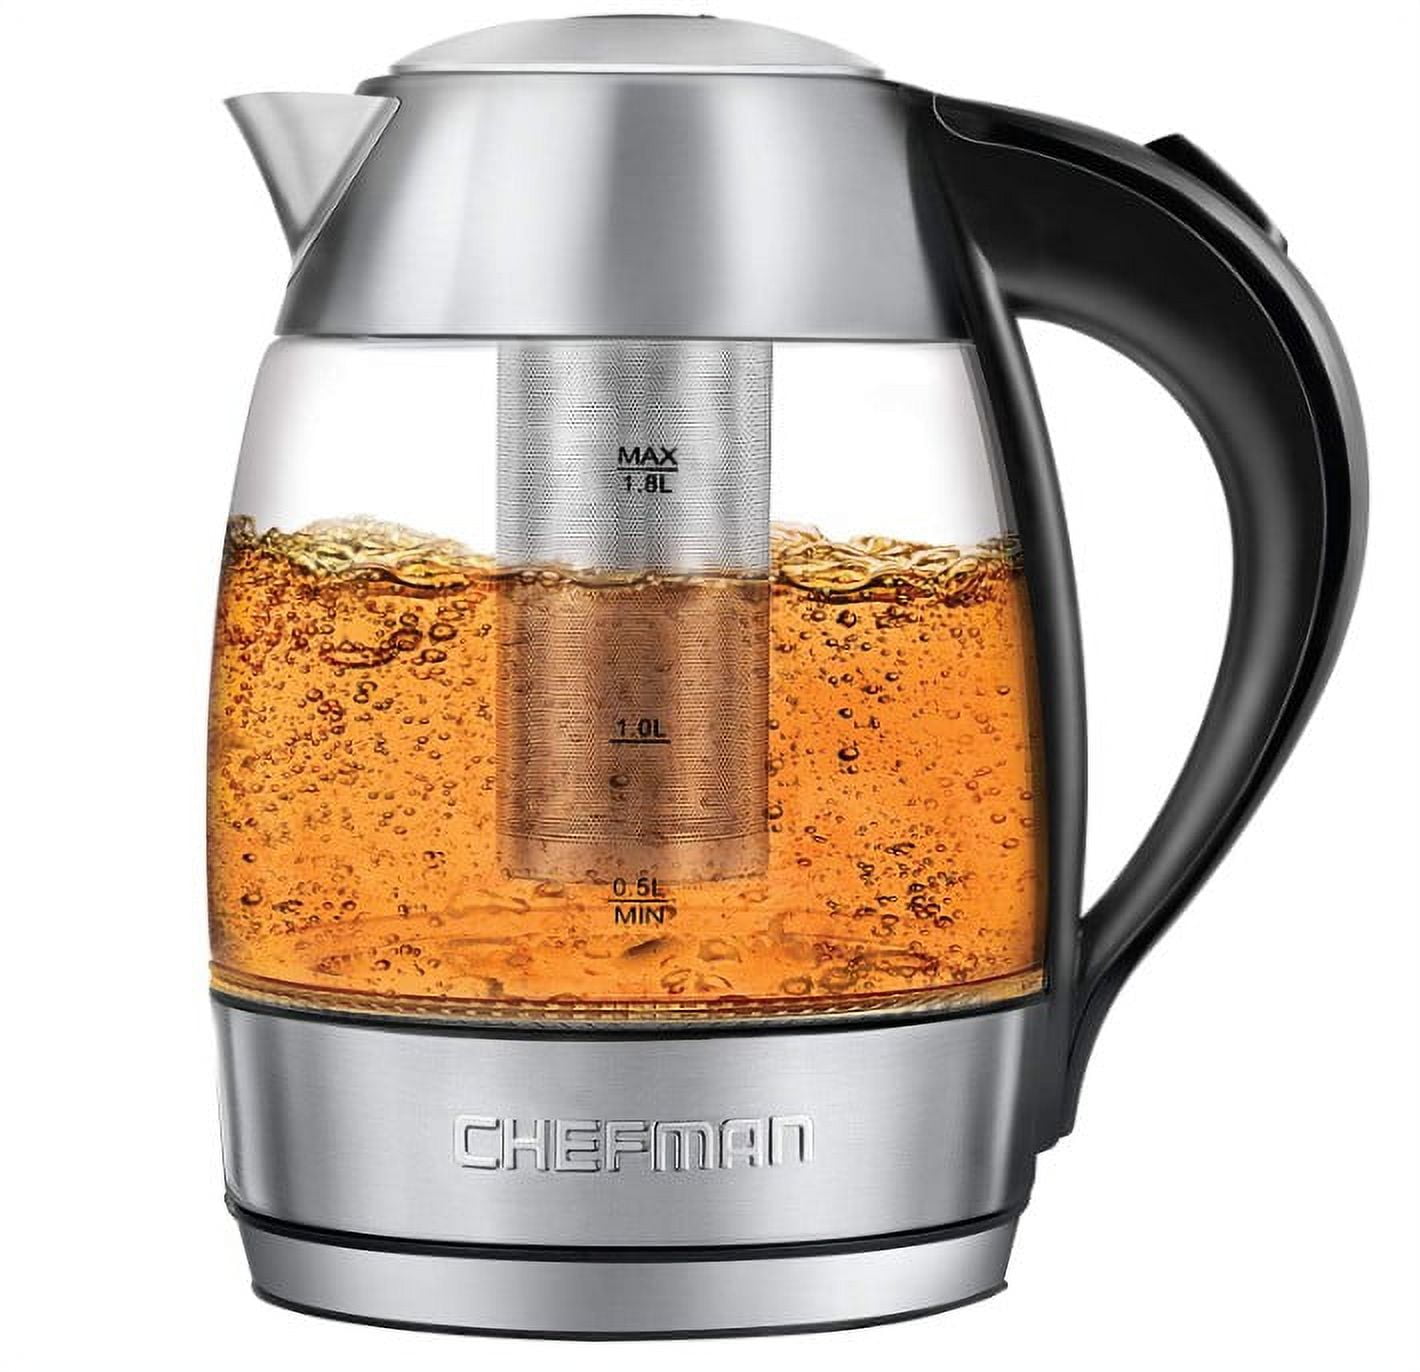 Chefman Fast Boiling 1.8L Electric Glass Kettle, Removable Tea Infuser, LED  Lights, Stainless Steel